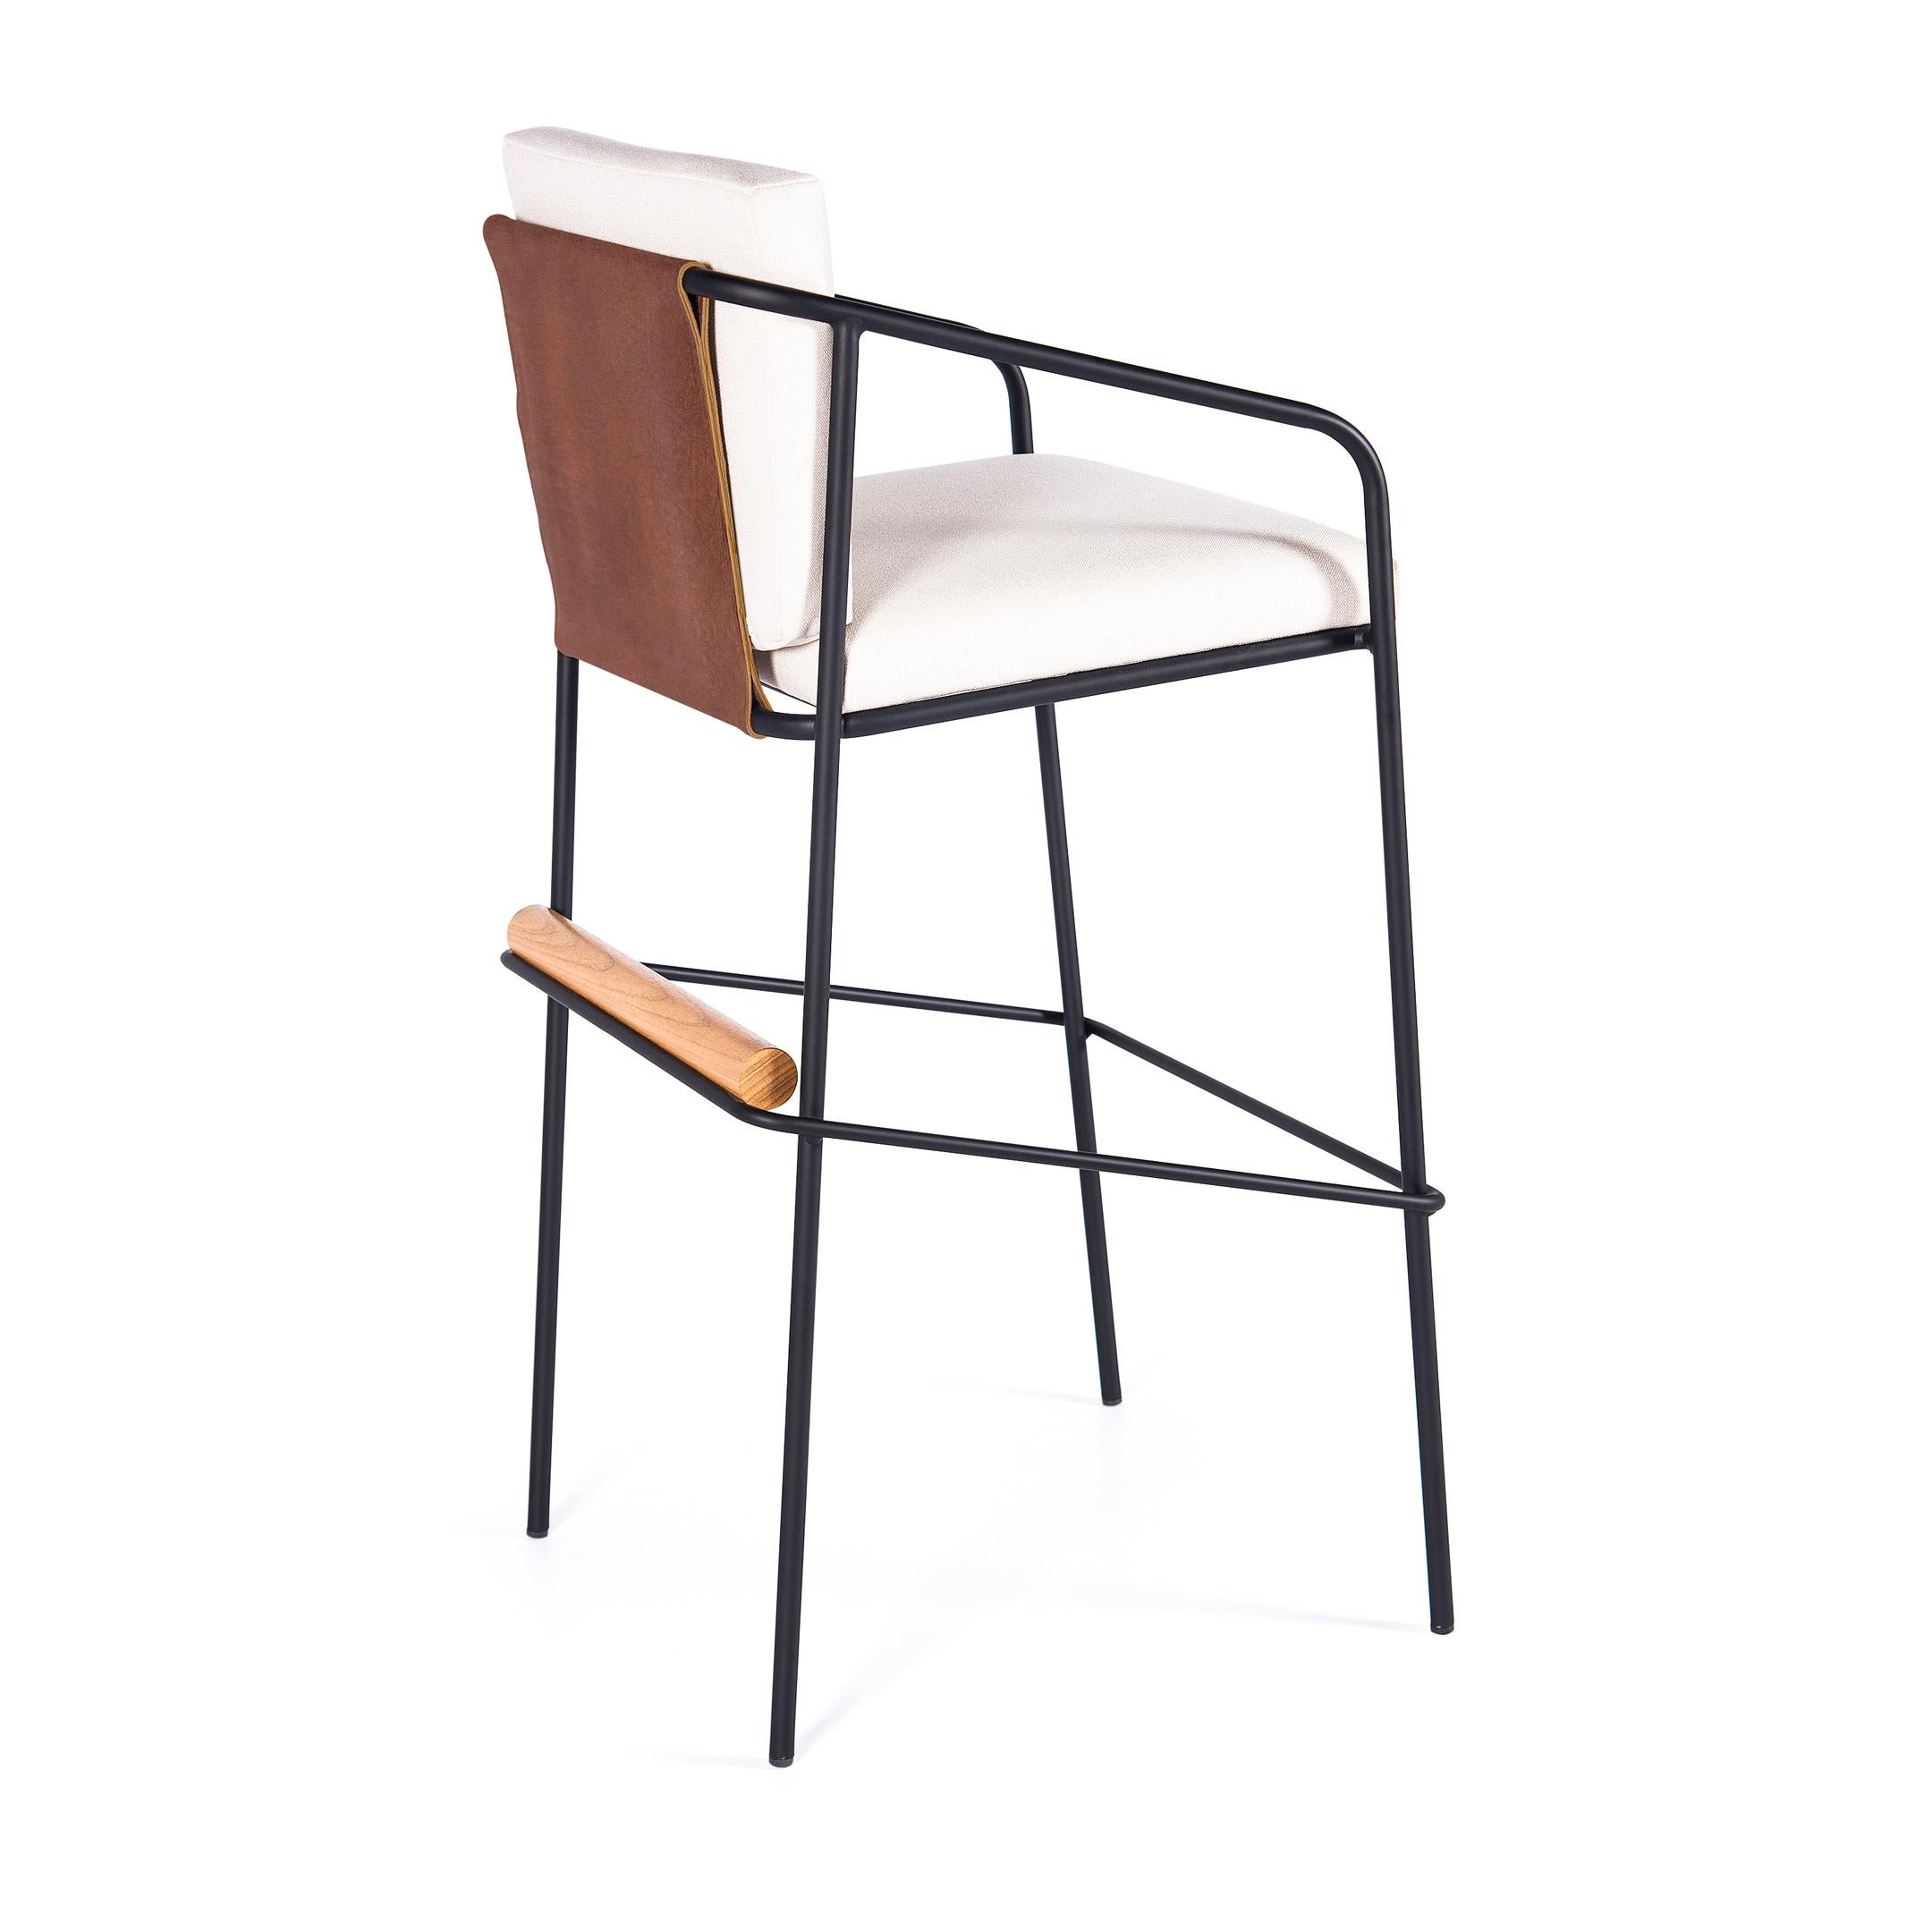 The structure of the OLAV stool is made of carbon steel in the painted with black ink, can be customized (request information).
The upholstery fabric that can be customized (request information).
It has leather backrest in afro finish and a natural